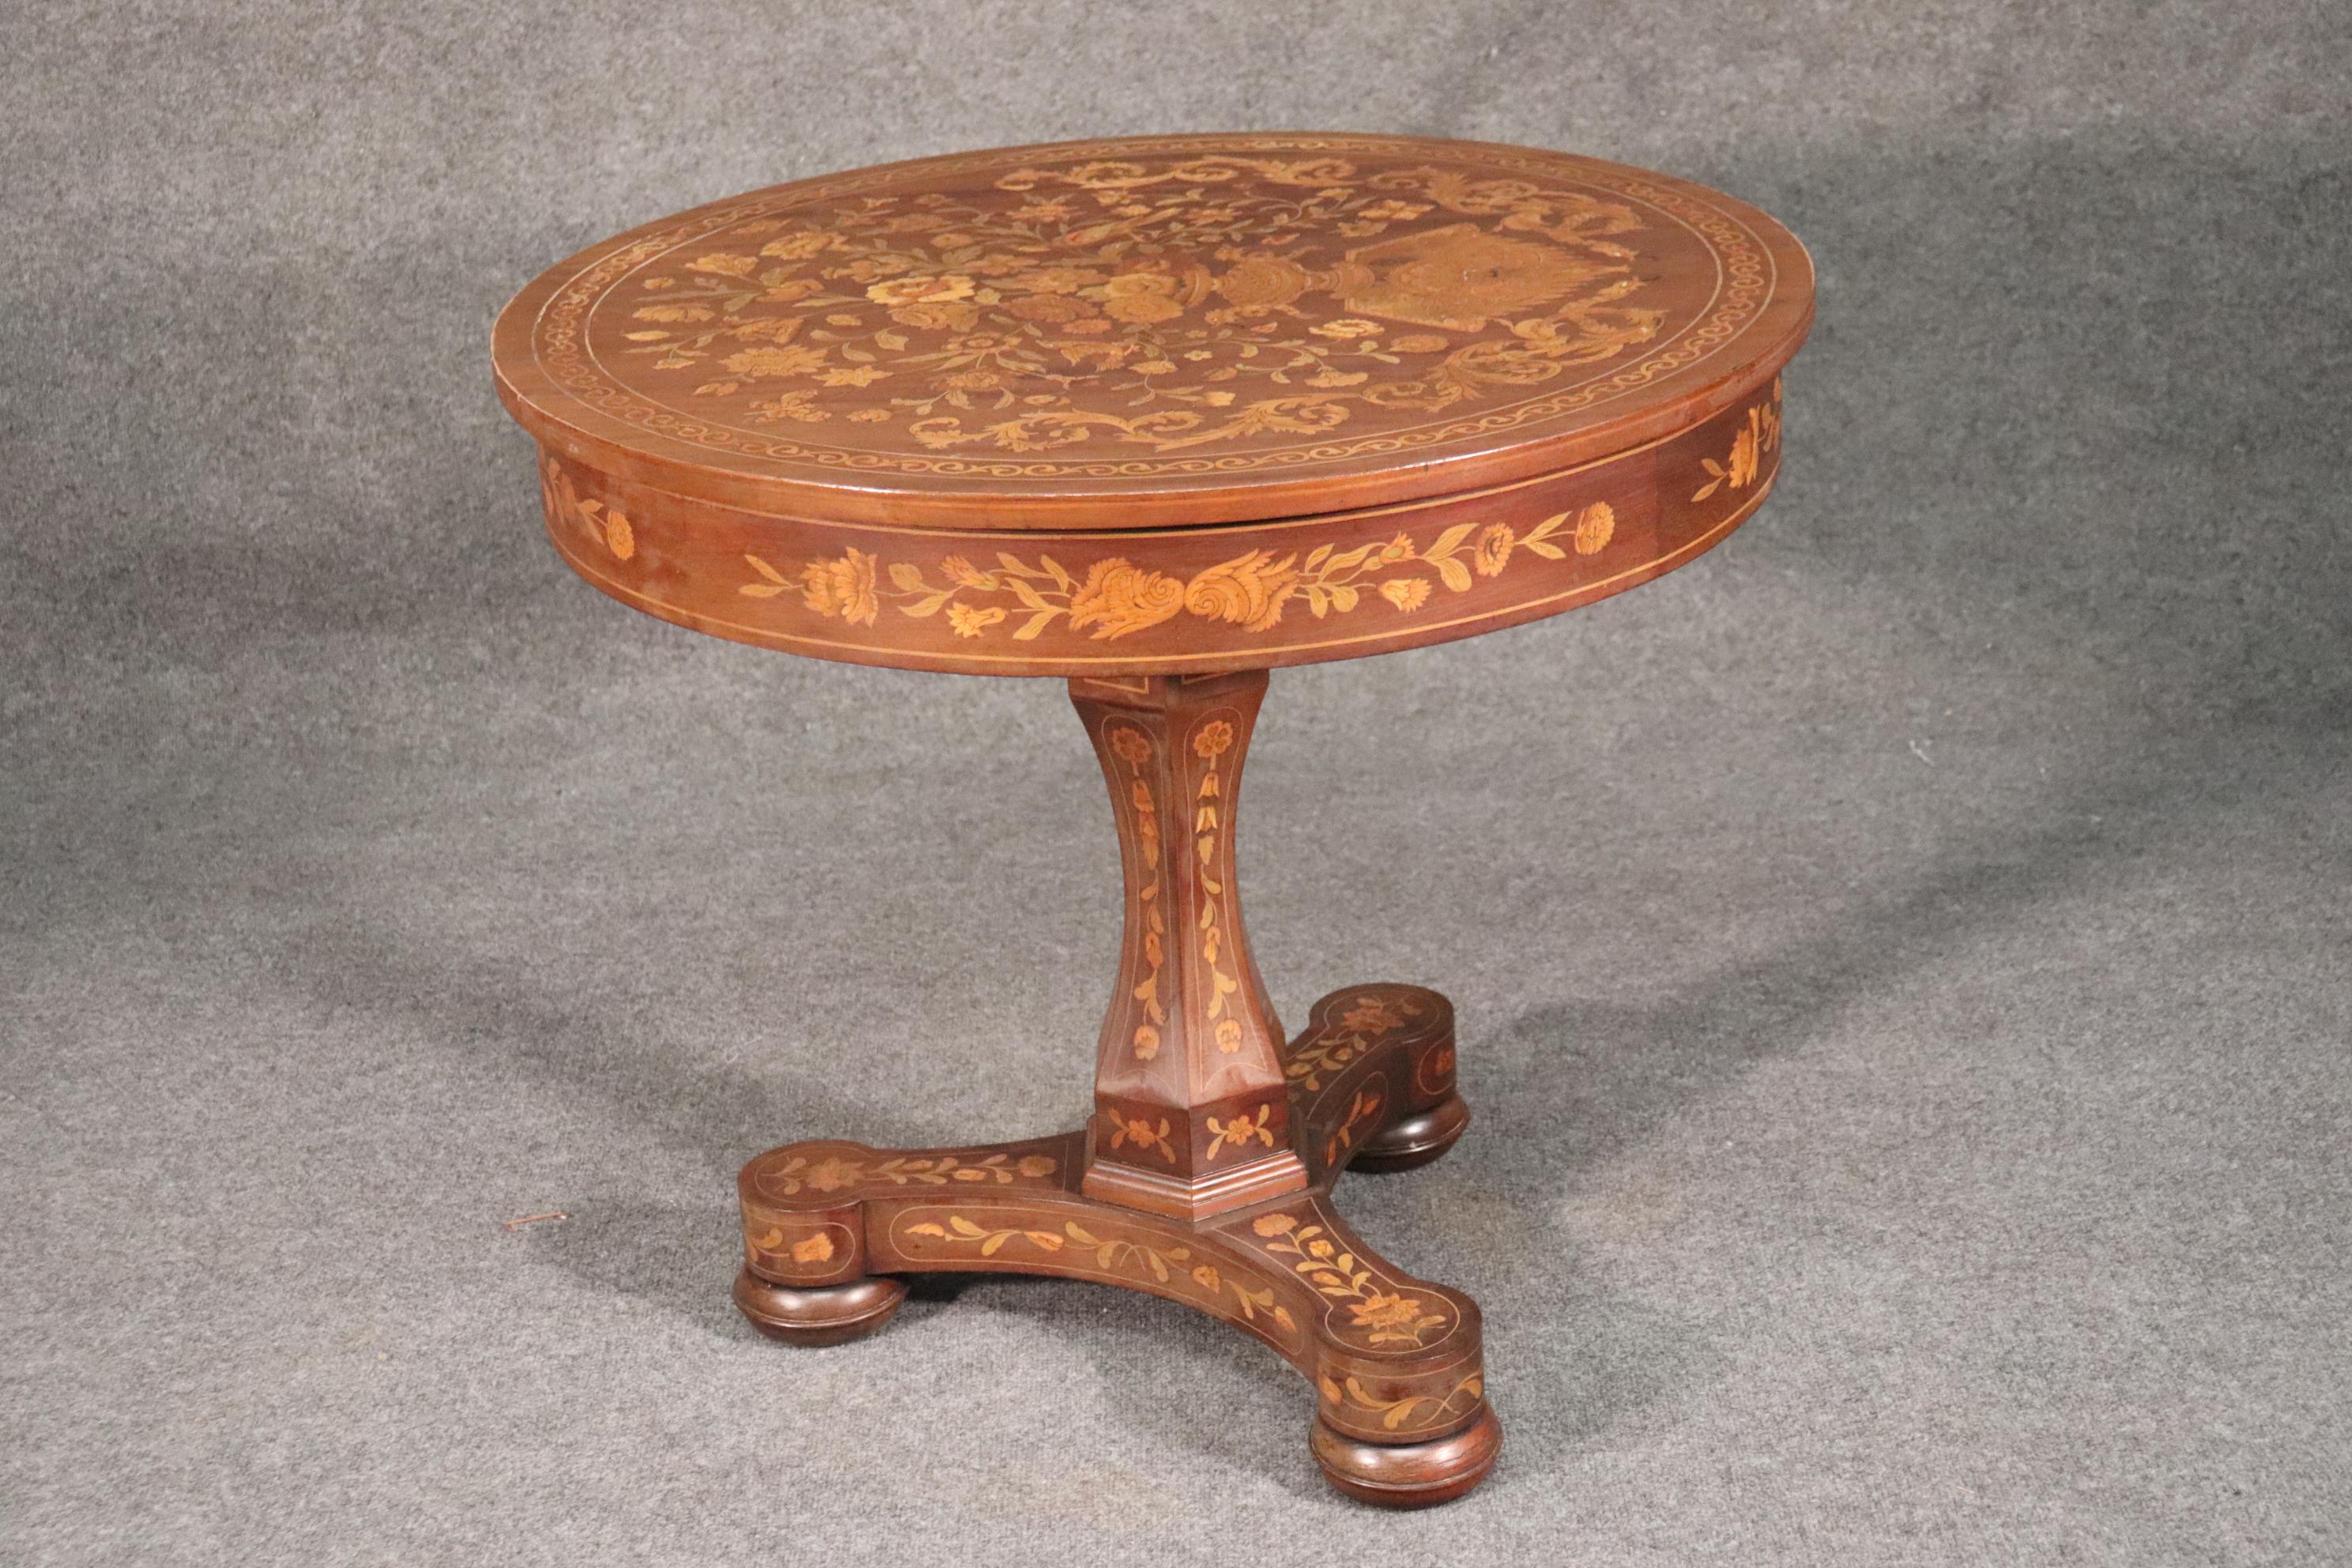 This is a beautiful inlaid Dutch marquetry center table of reasonable size. The table features stained tulip wood and satinwood inlay and a mahogany frame. The table measures 33 wide x 33 deep x 29 tall. The table is in good antique condition.